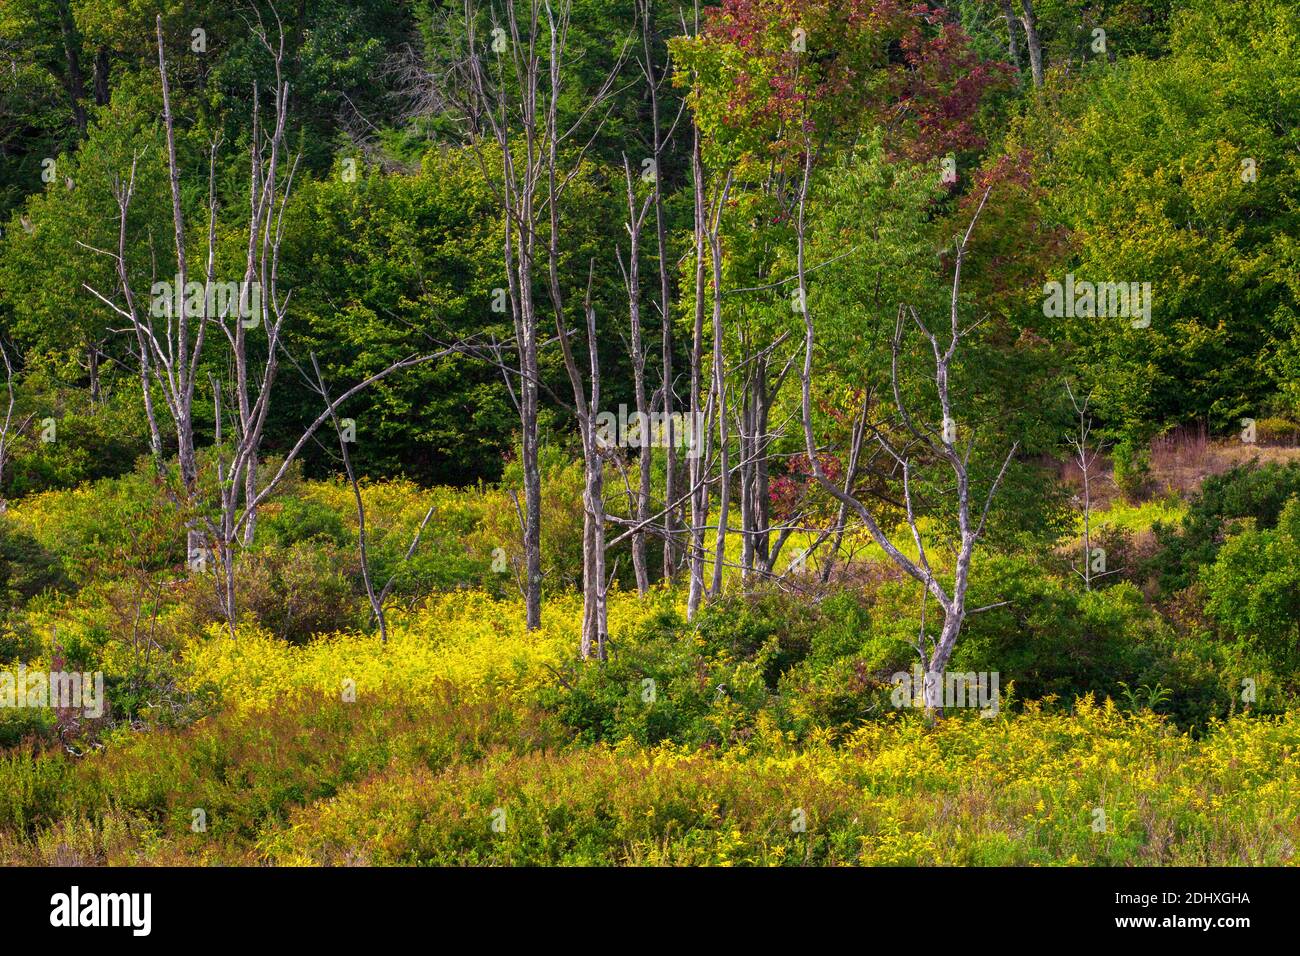 At the edge of a wetland and upland meadow a thicket has developed providing wildlife habitat in Pennsylvania’s Pocono Mountans. Stock Photo